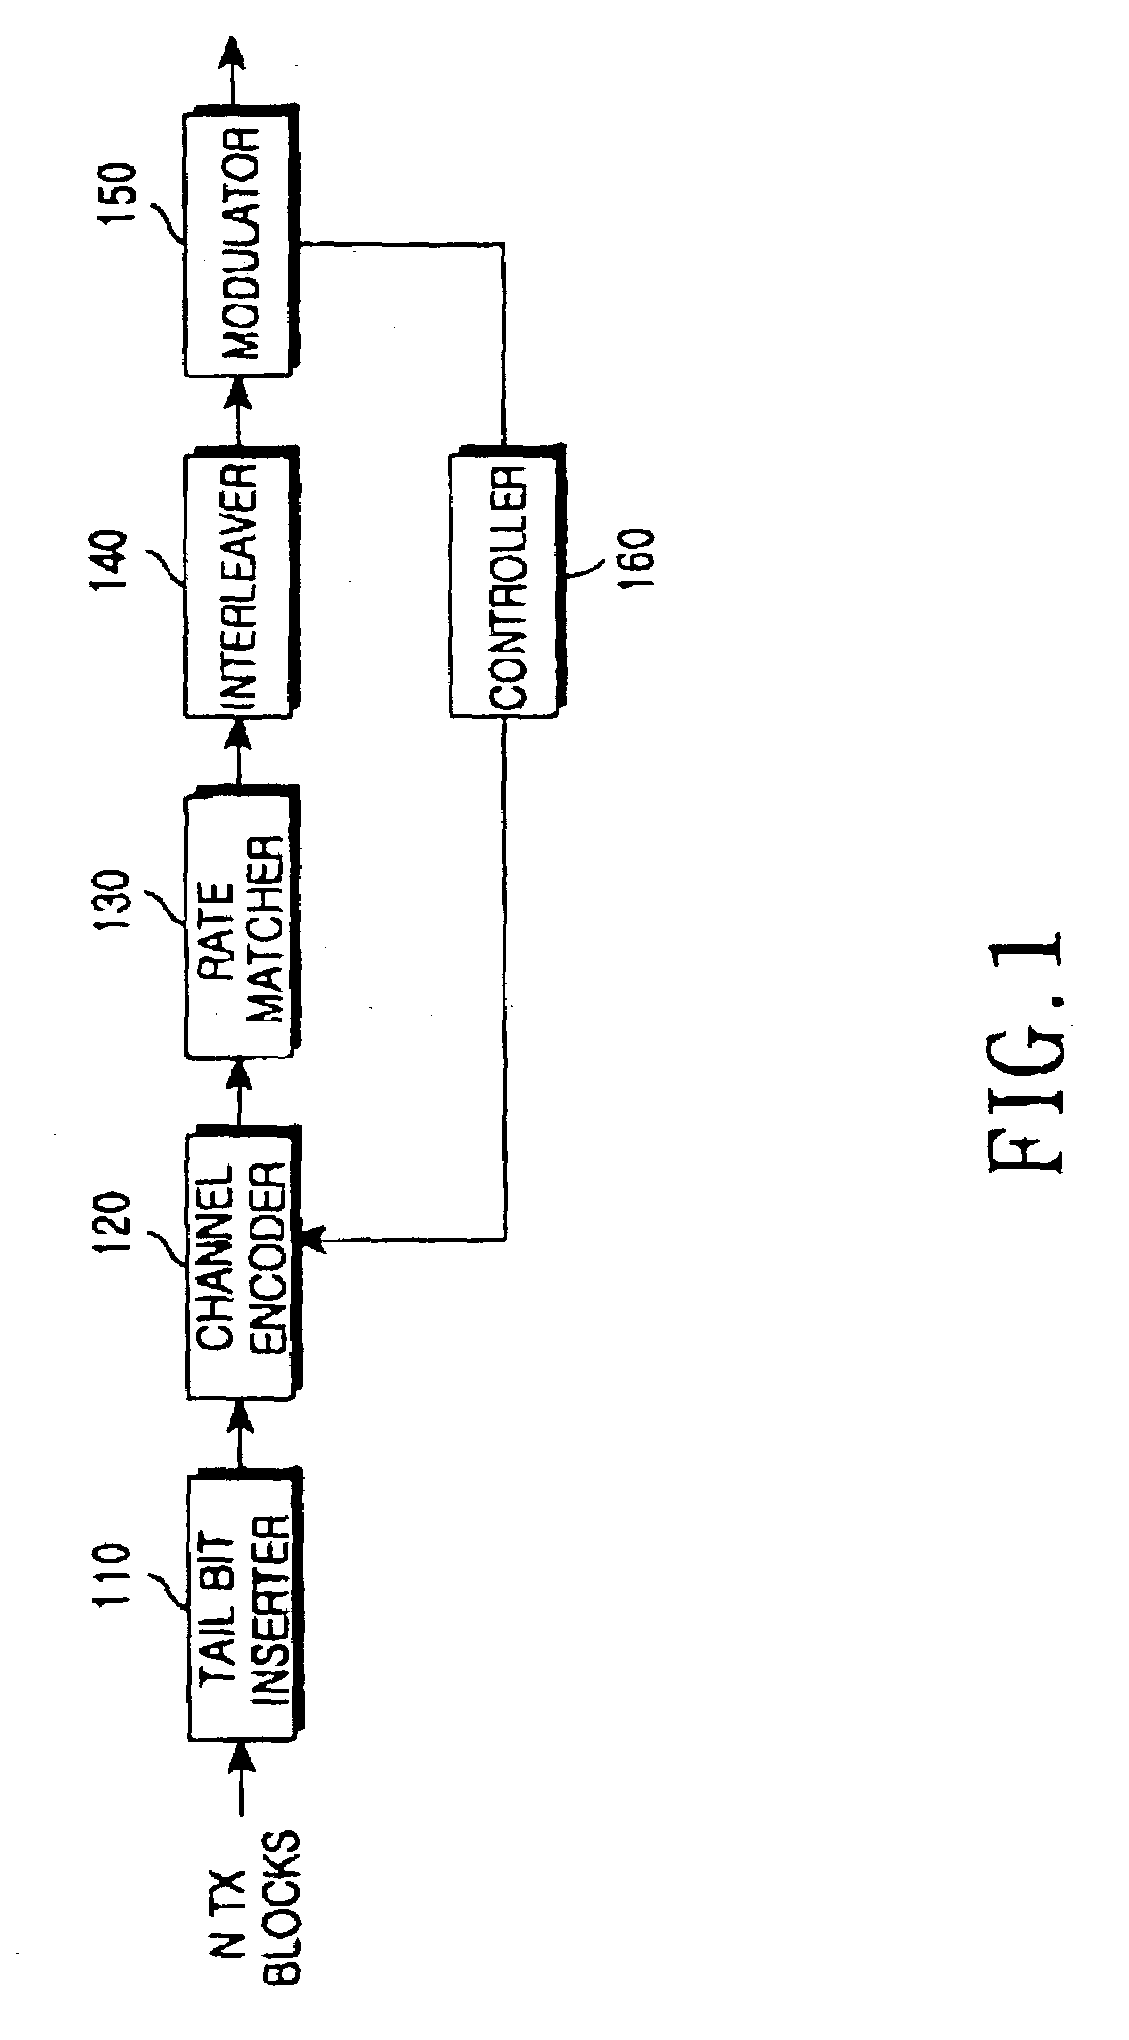 Apparatus and method for performing coding and rate matching in a CDMA mobile communication system